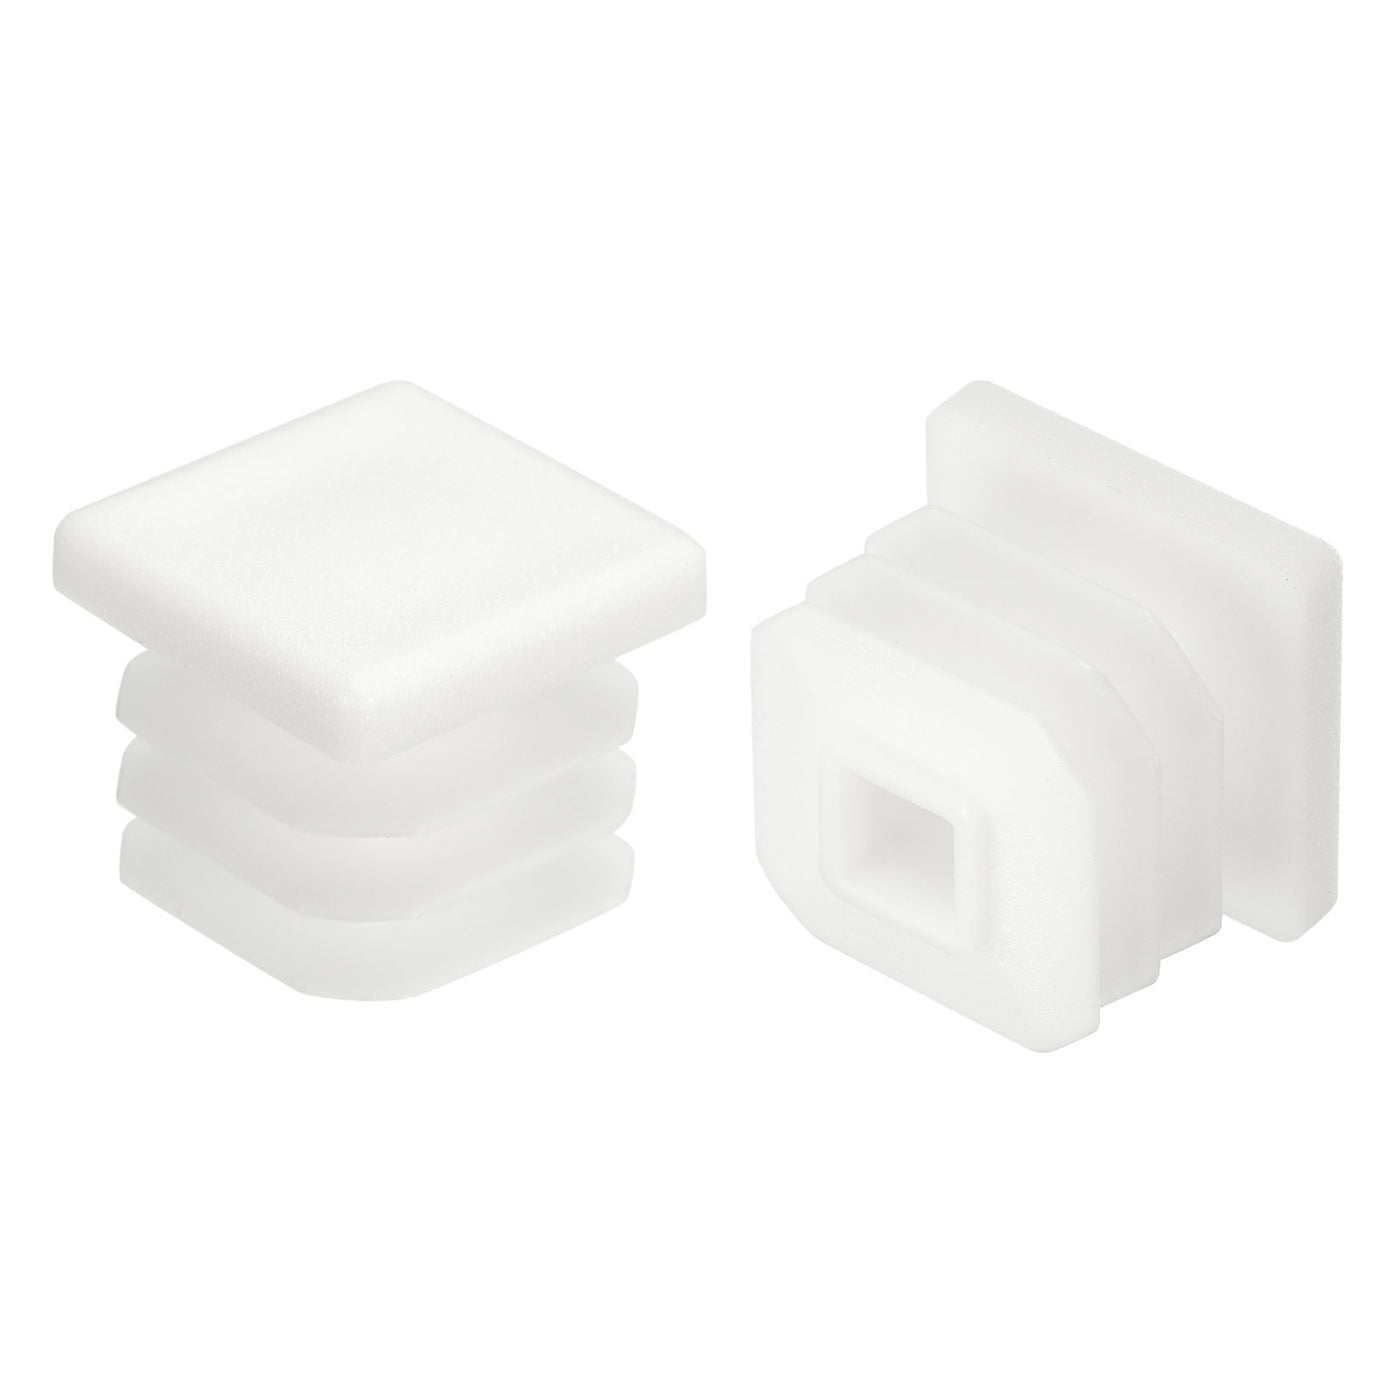 uxcell Uxcell 8Pcs 16mmx16mm(0.63inch) Plastic Tubing Plug Square Post End Caps White